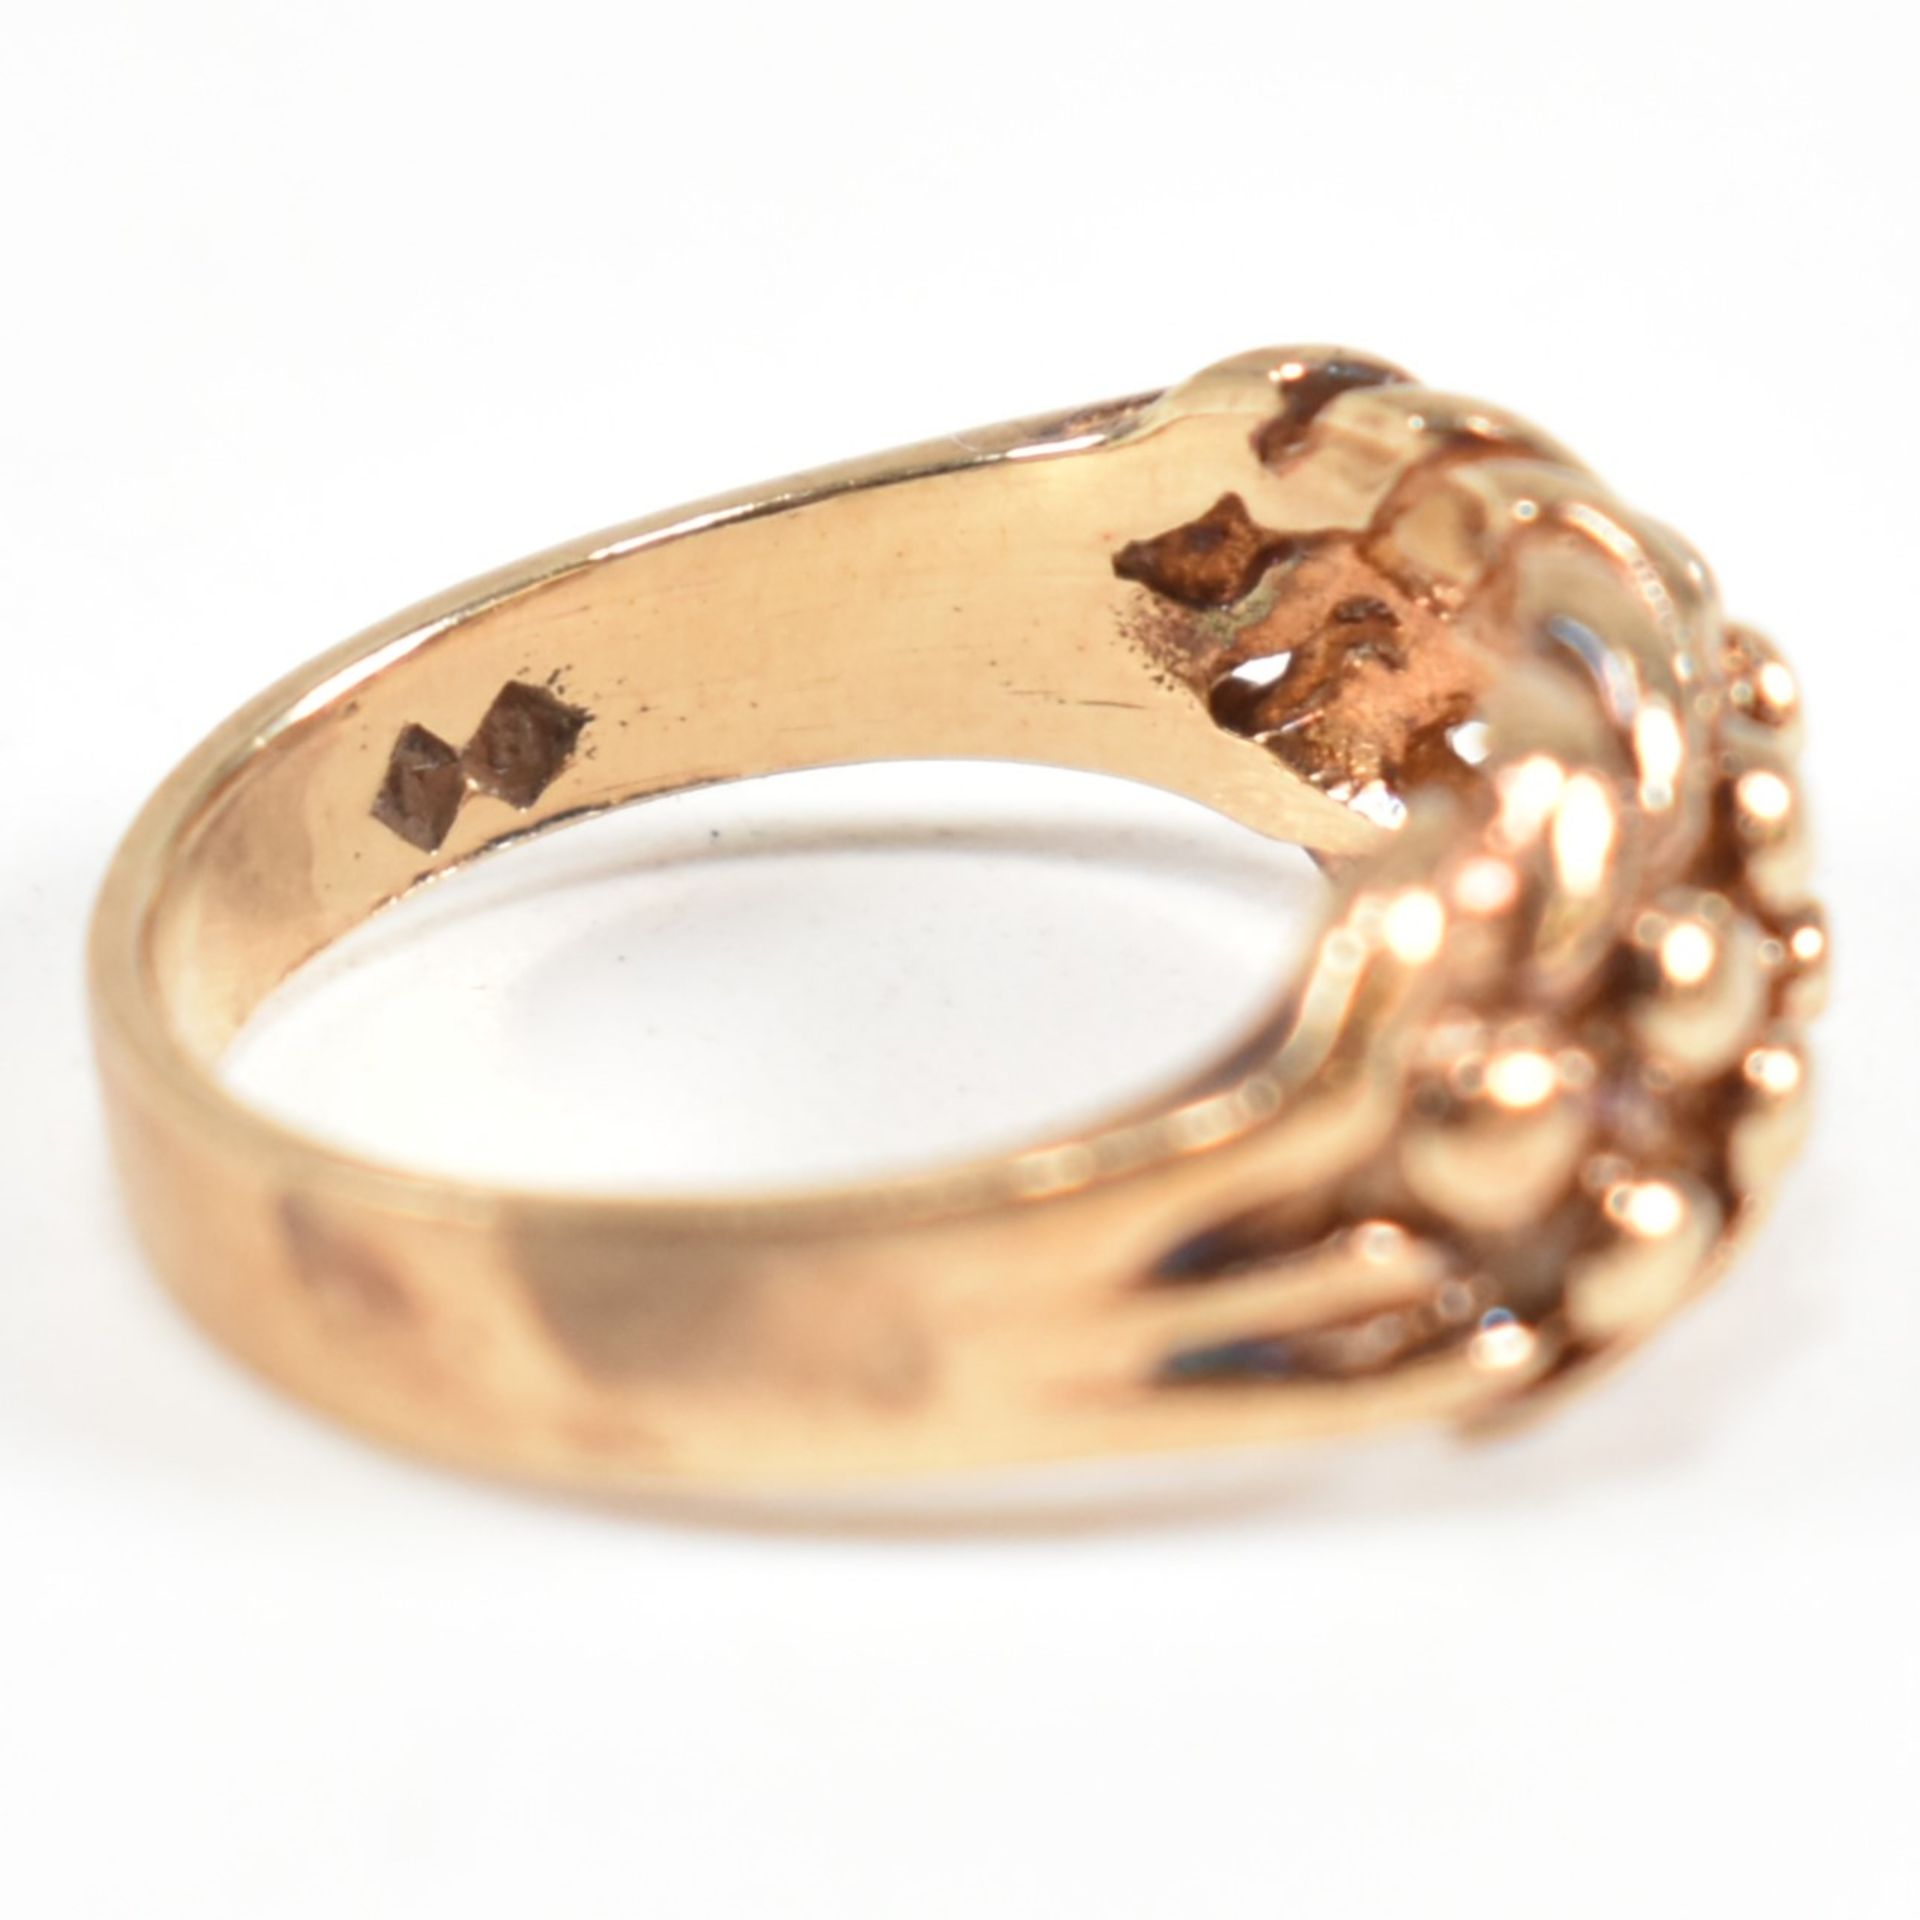 HALLMARKED 9CT GOLD KEEPER RING - Image 4 of 10